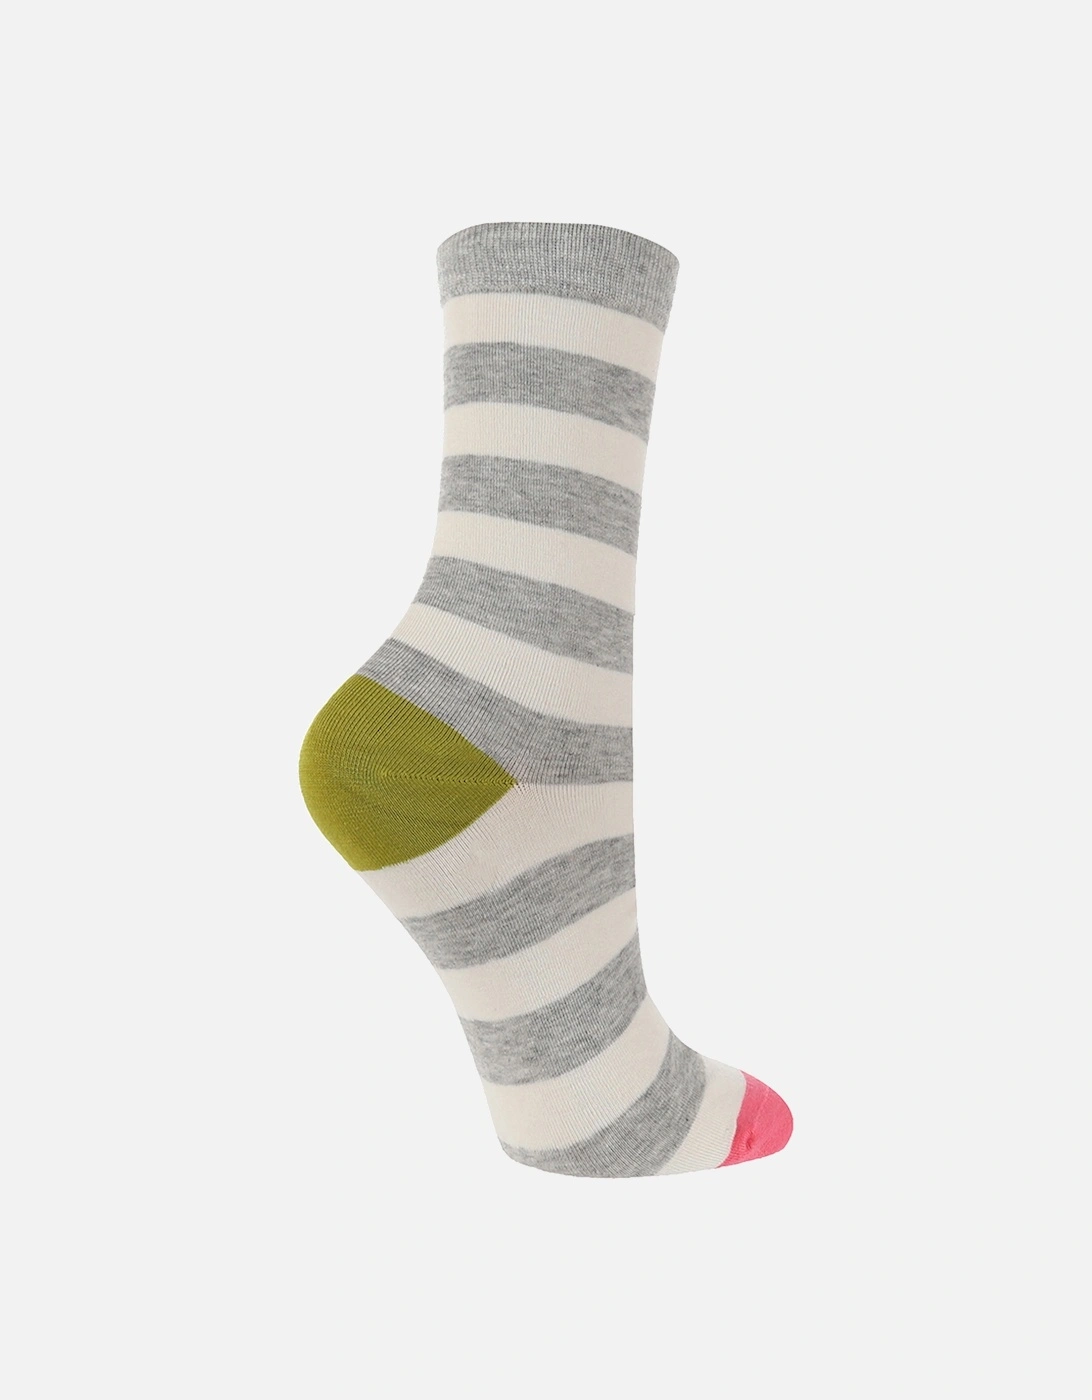 1 PAIR HIGH-END SOCK WITH GREY AND CREAM STRIPES, 2 of 1